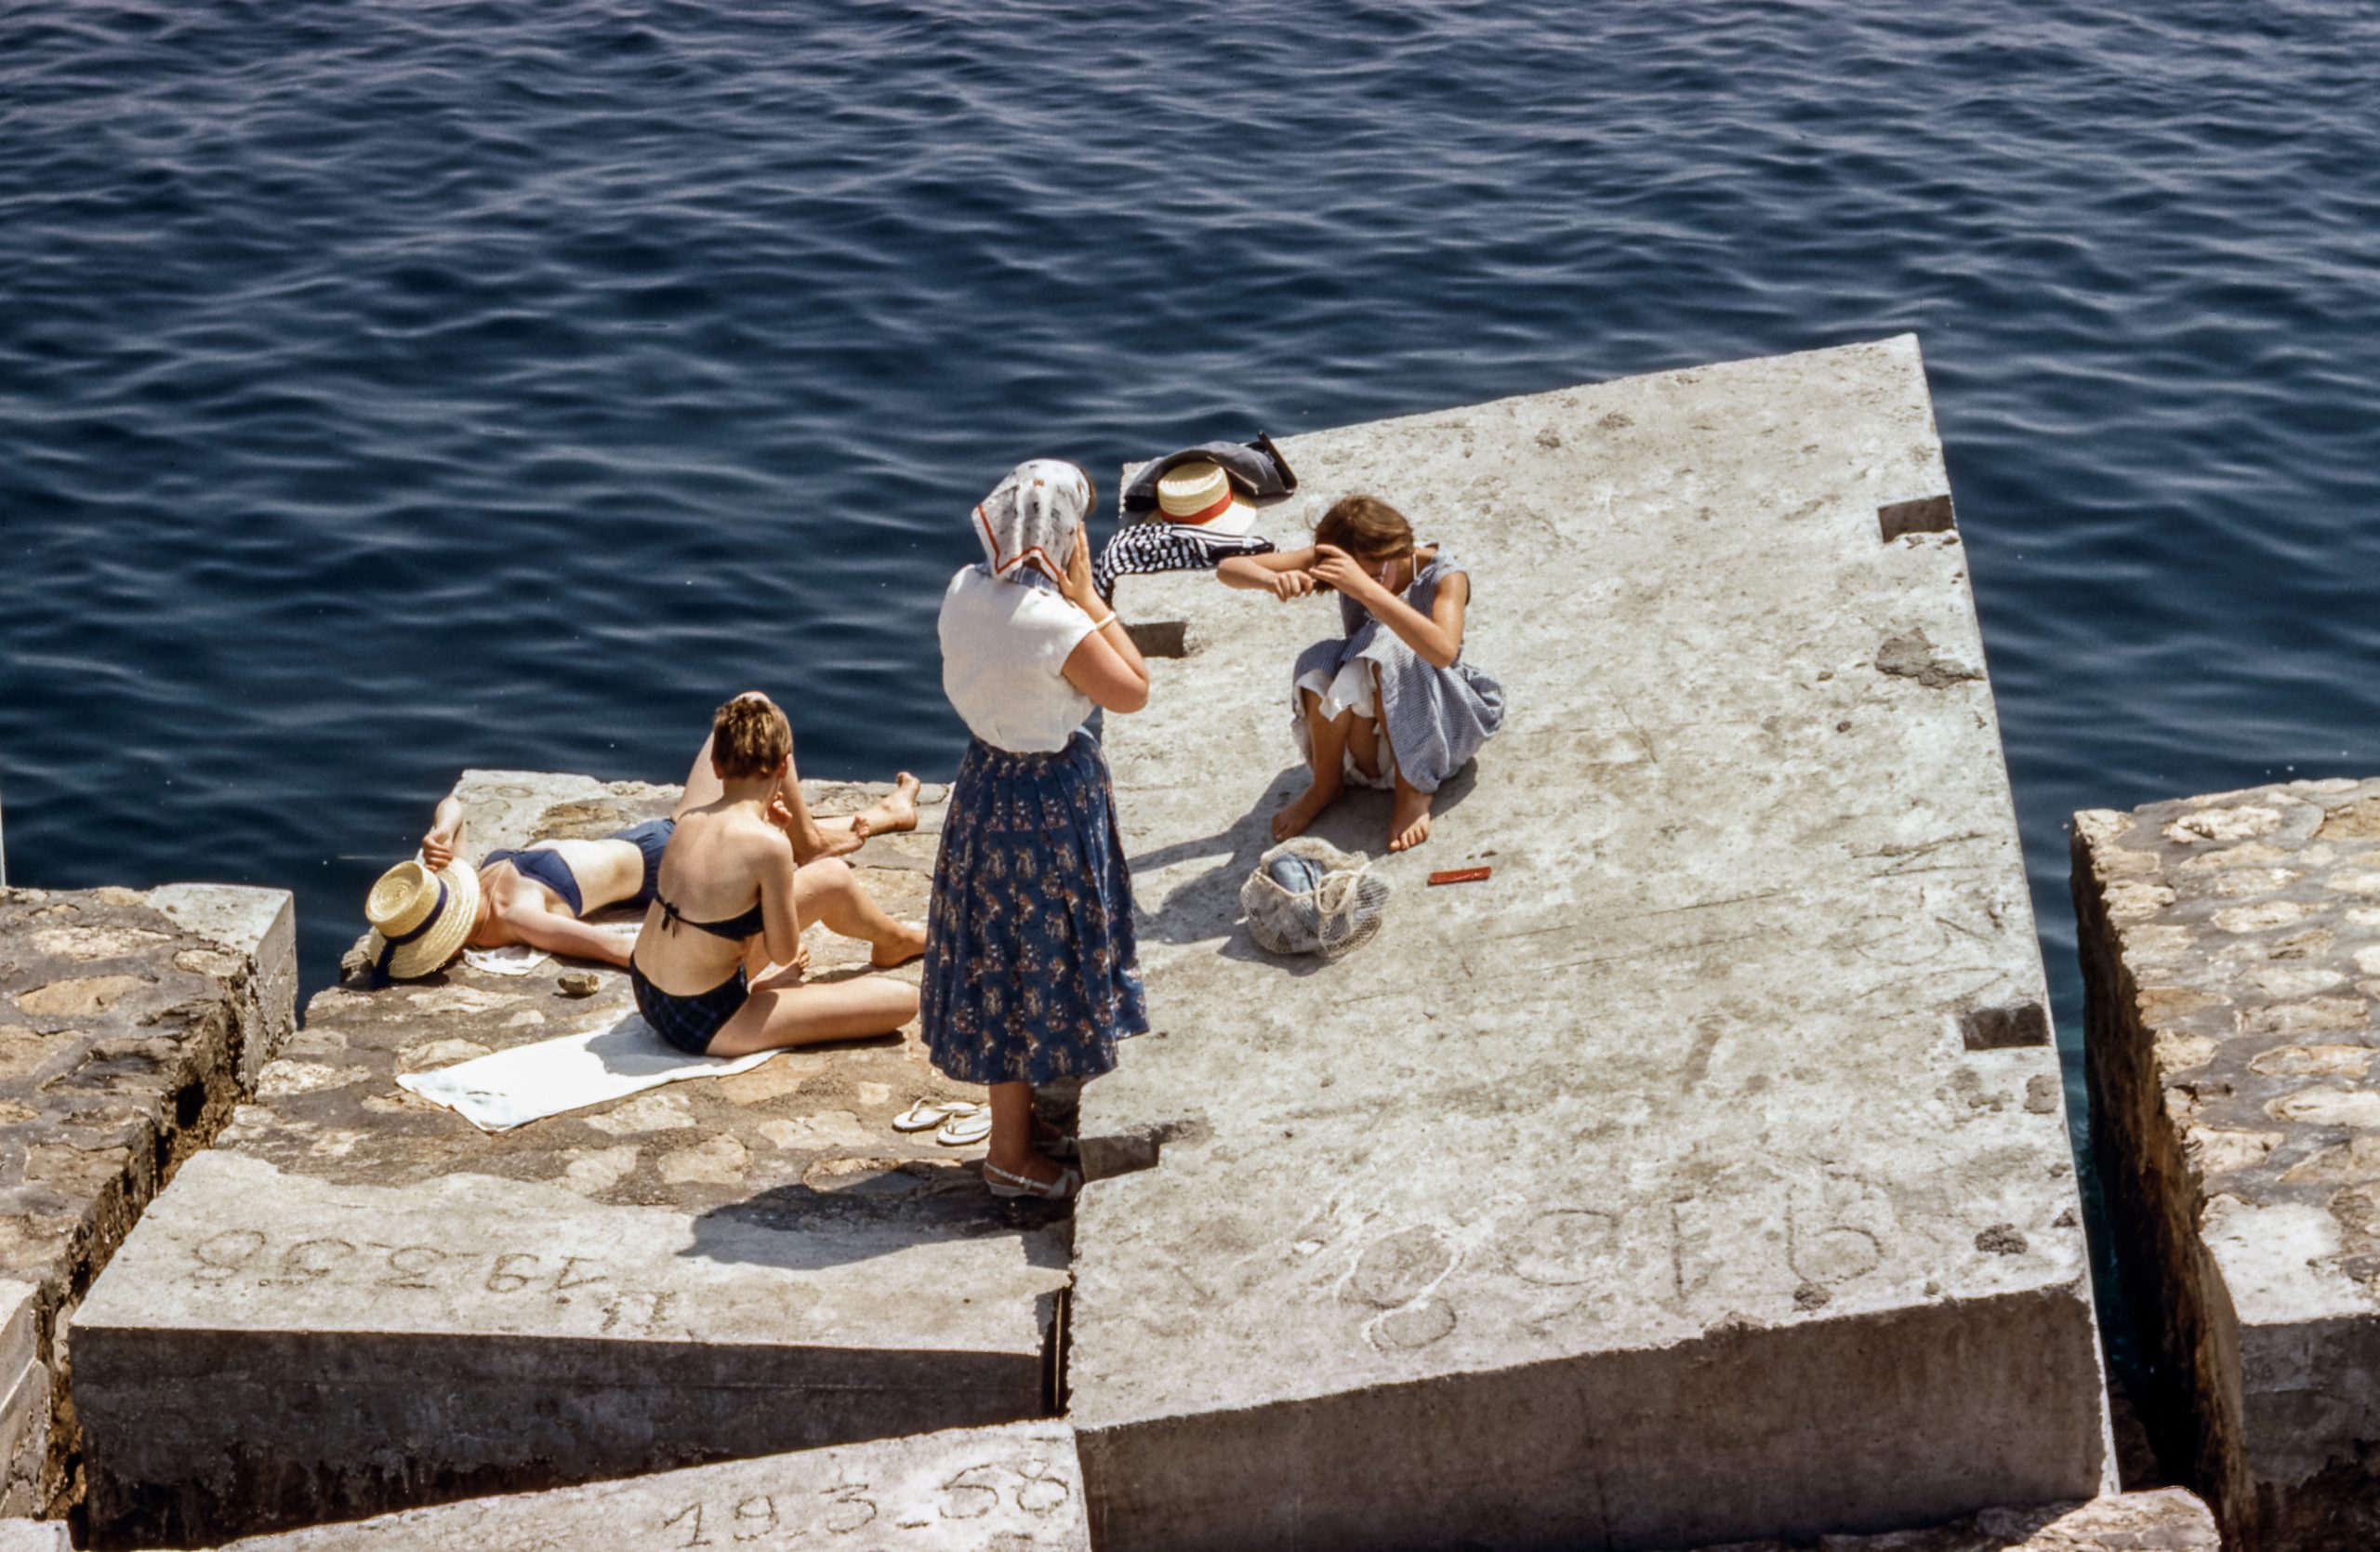 Vintage photograph of women by the ocean in swimsuits